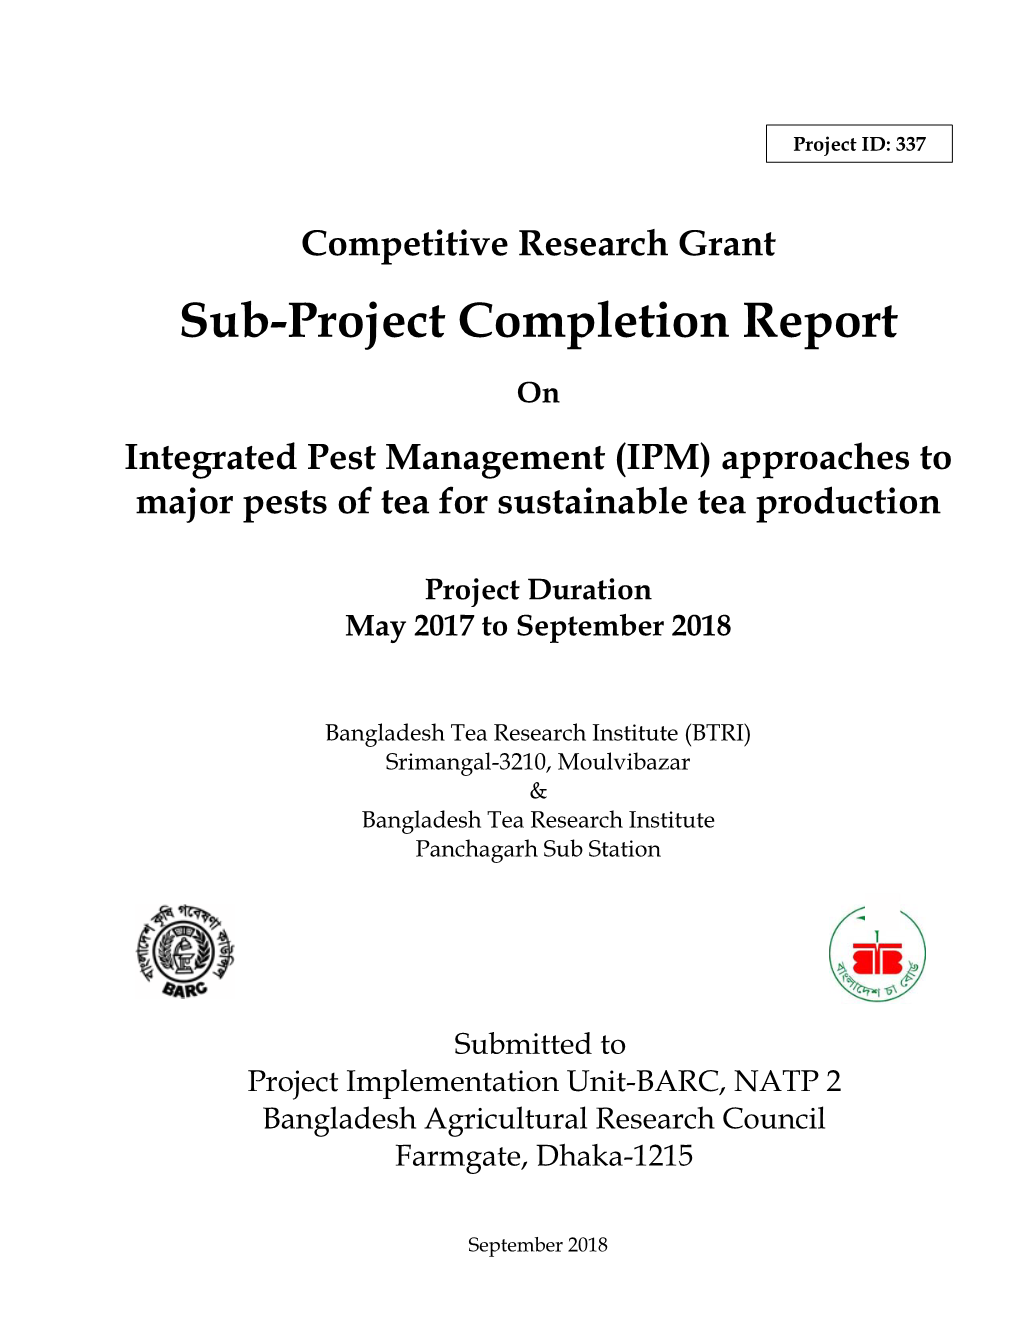 Competitive Research Grant Sub-Project Completion Report on Integrated Pest Management